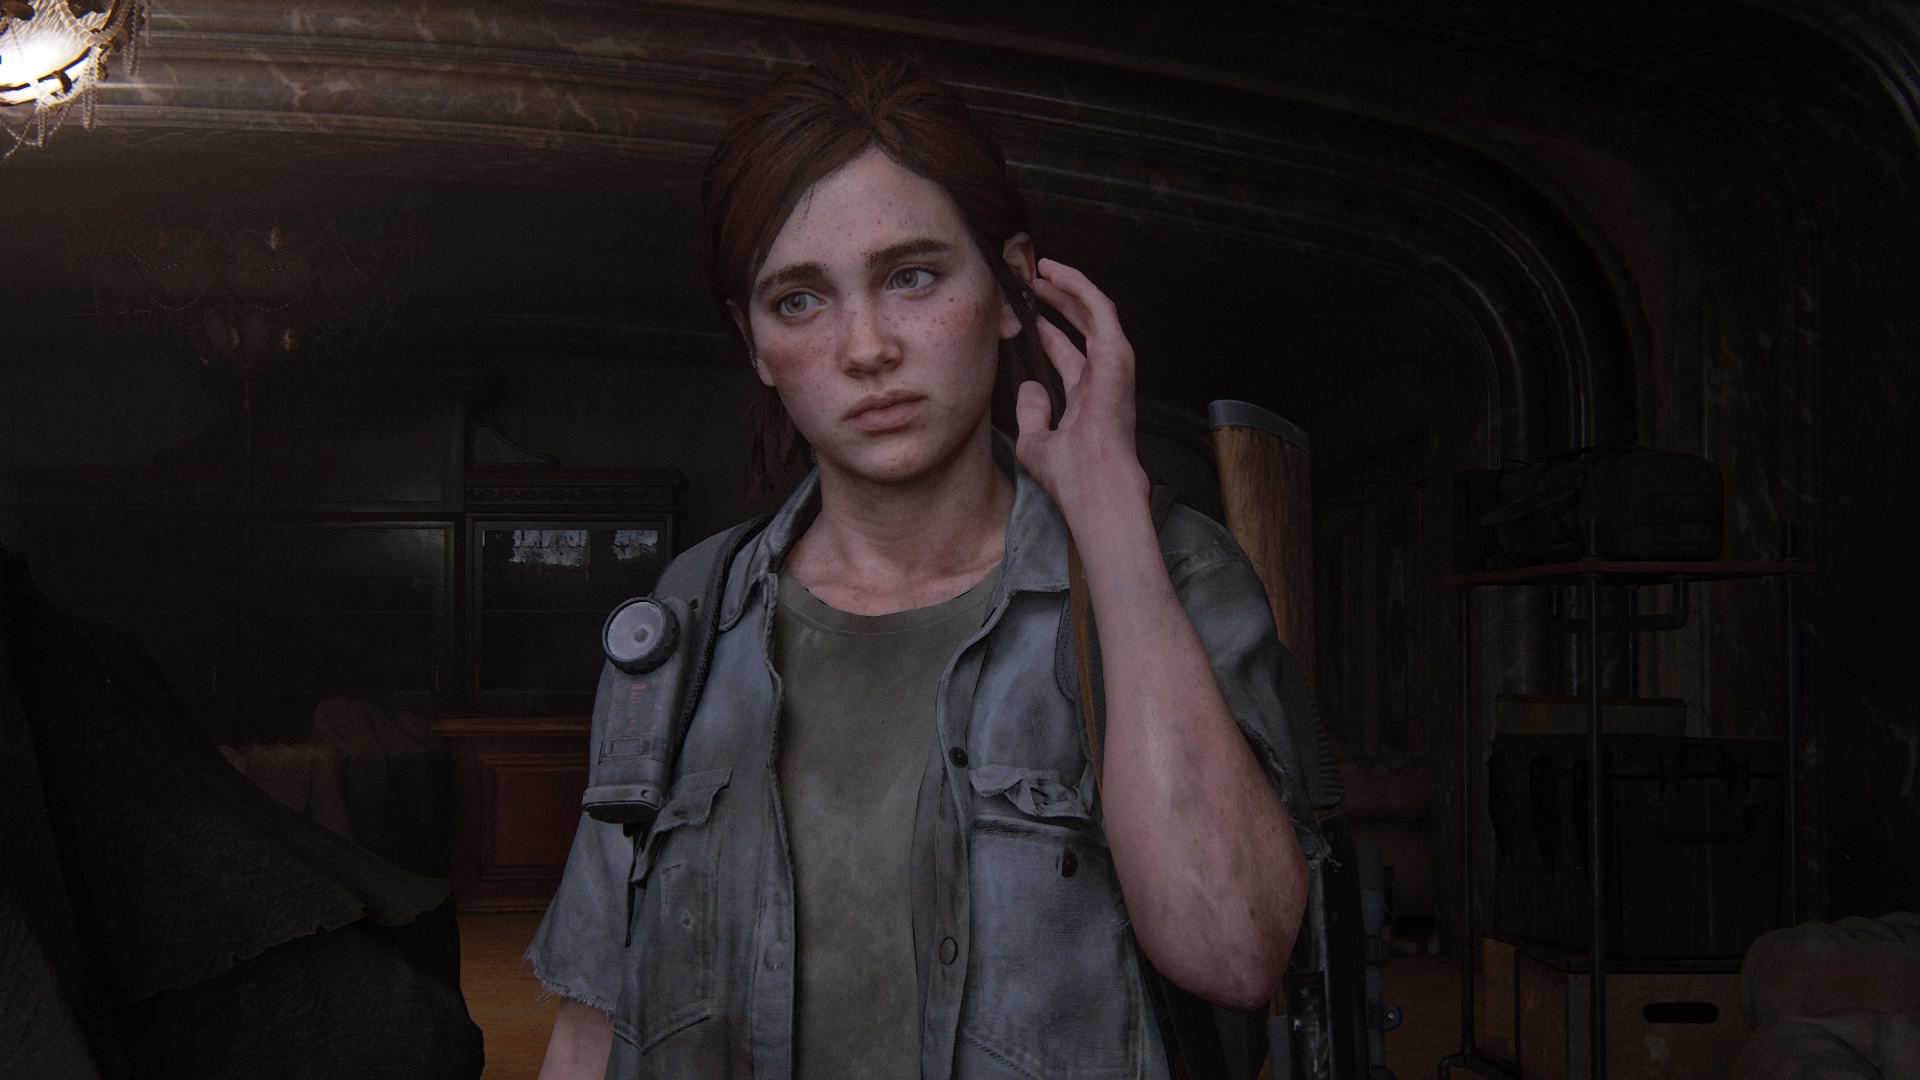 Katarina ✨ Abby Stan Account on X: These are the TLOU game